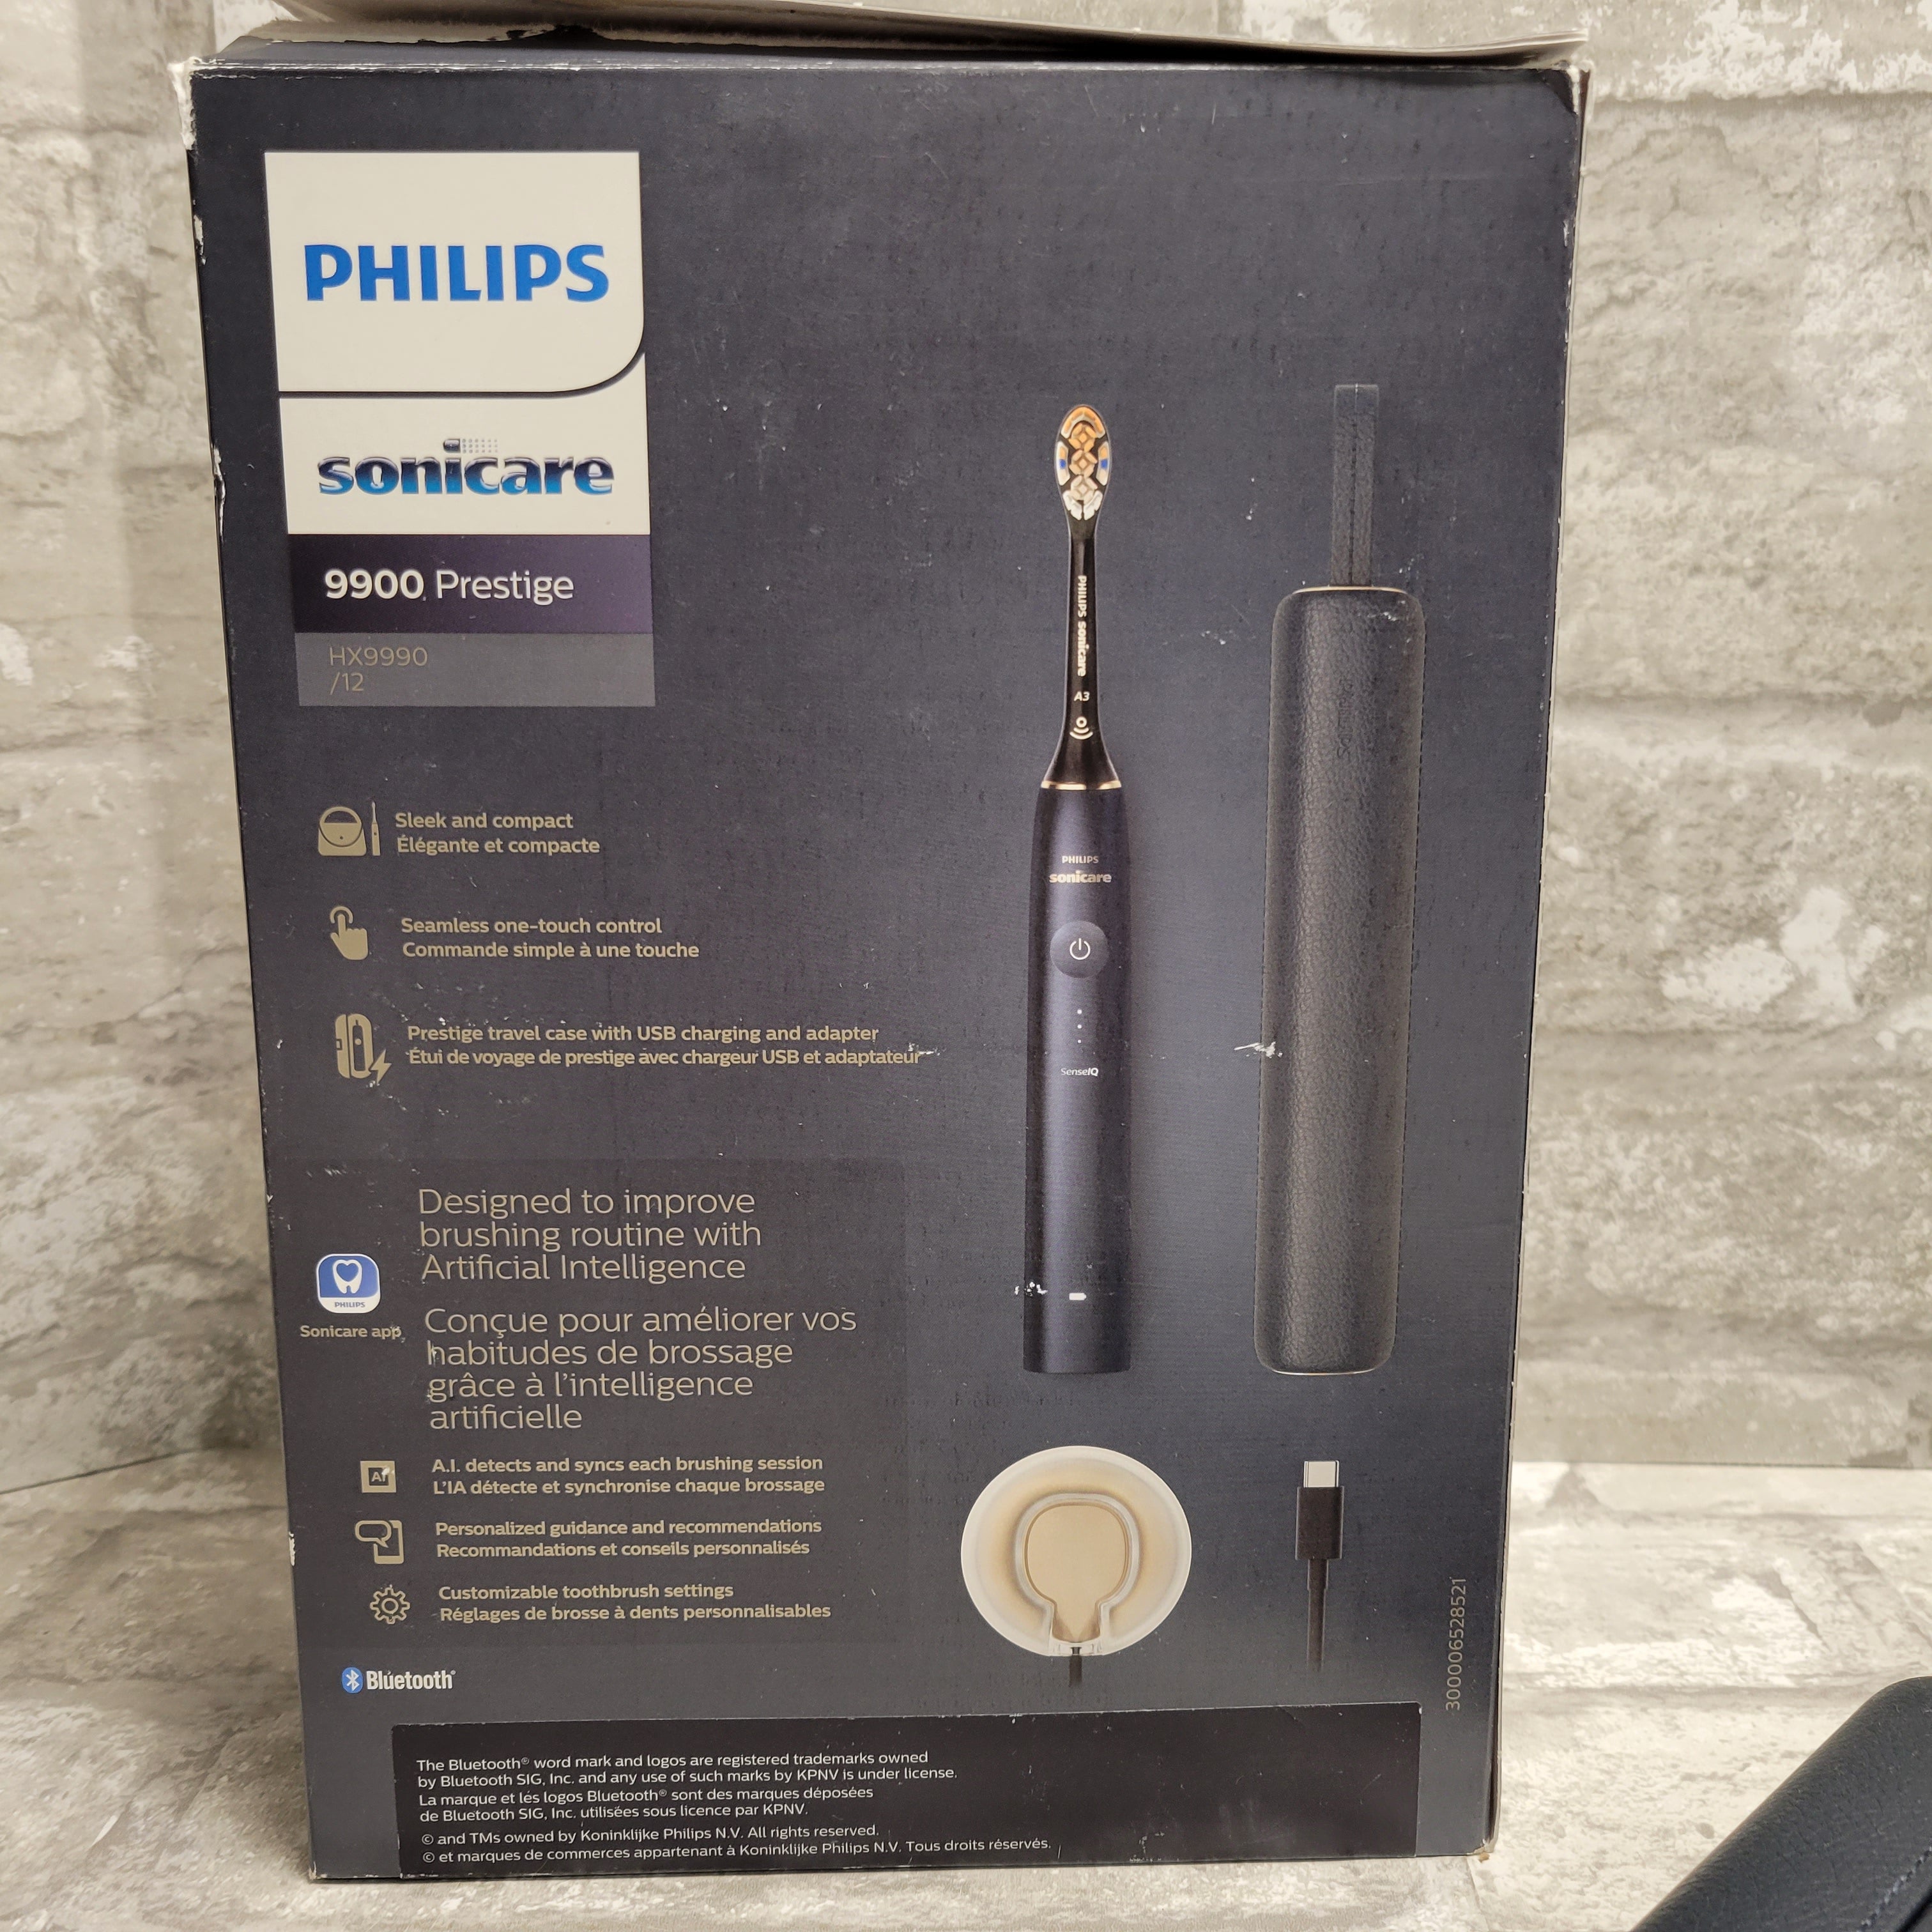 Philips Sonicare Prestige 9900 Rechargeable Electric Toothbrush With SenseIQ (8045412155630)